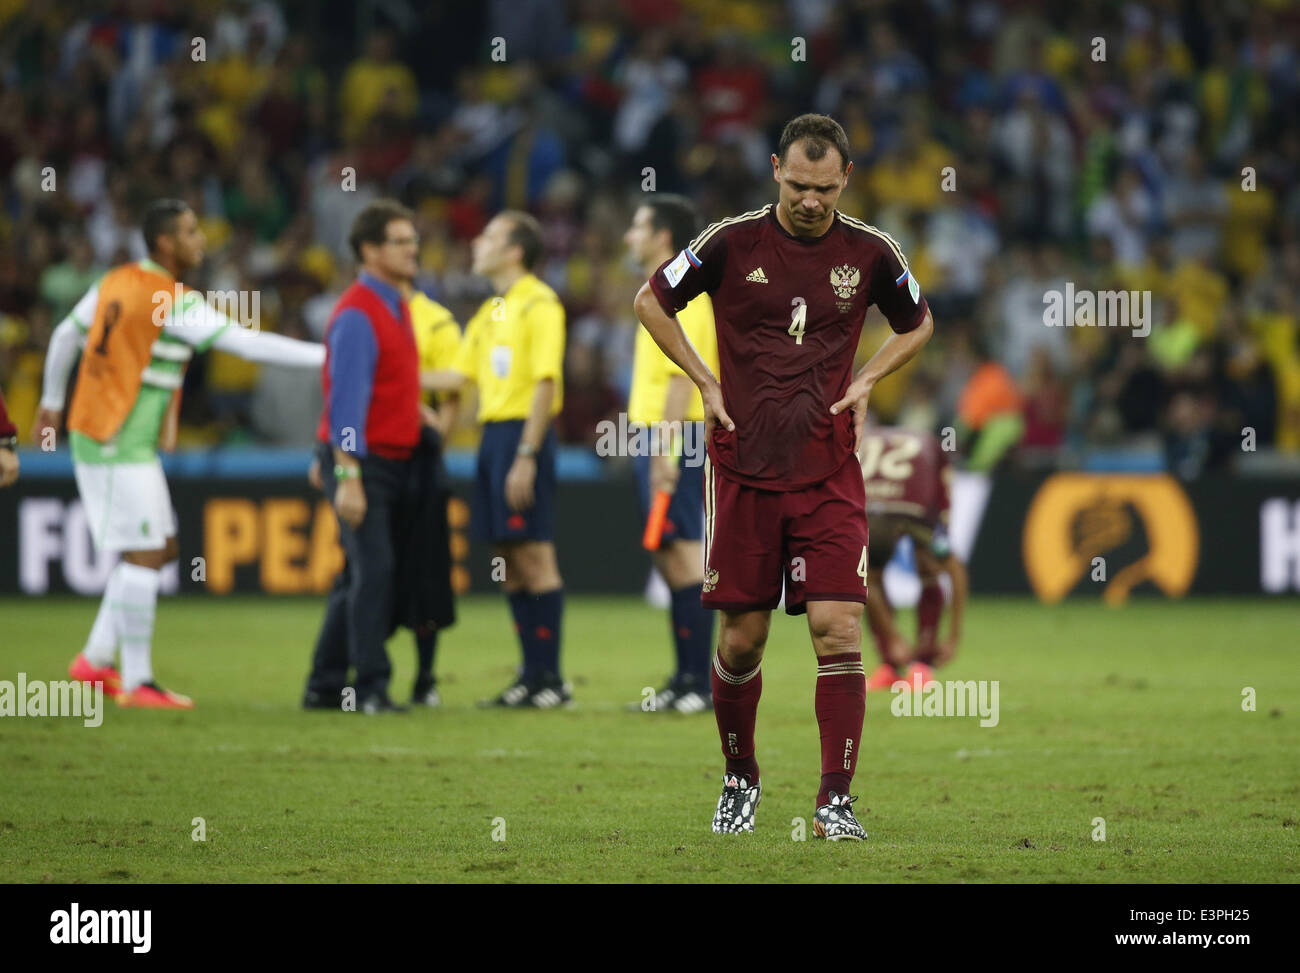 (140626) -- CURITIBA, June 26, 2014 (Xinhua) -- Russia's Sergey Ignashevich reacts after a Group H match between Algeria and Russia of 2014 FIFA World Cup at the Arena da Baixada Stadium in Curitiba, Brazil, June 26, 2014. The match ended in a 1-1 draw.Algeria enters Round of 16 after the Thursday match which ended in a 1-1 draw.(Xinhua/Liao Yujie) Stock Photo